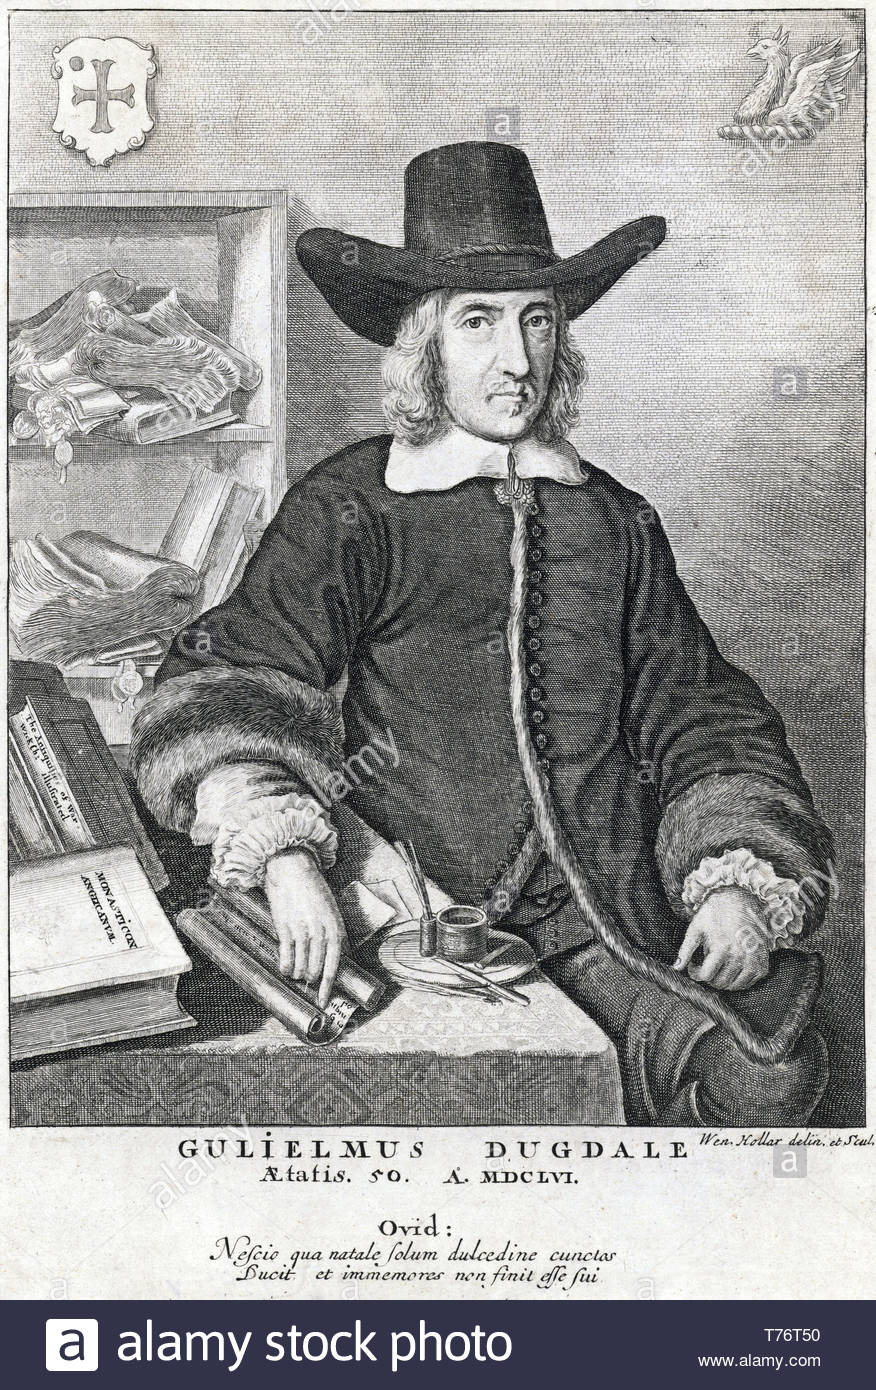 Sir William Dugdale portrait, 1605 – 1686, was an English antiquary and herald, etching by Bohemian etcher Wenceslaus Hollar from 1600s Stock Photo